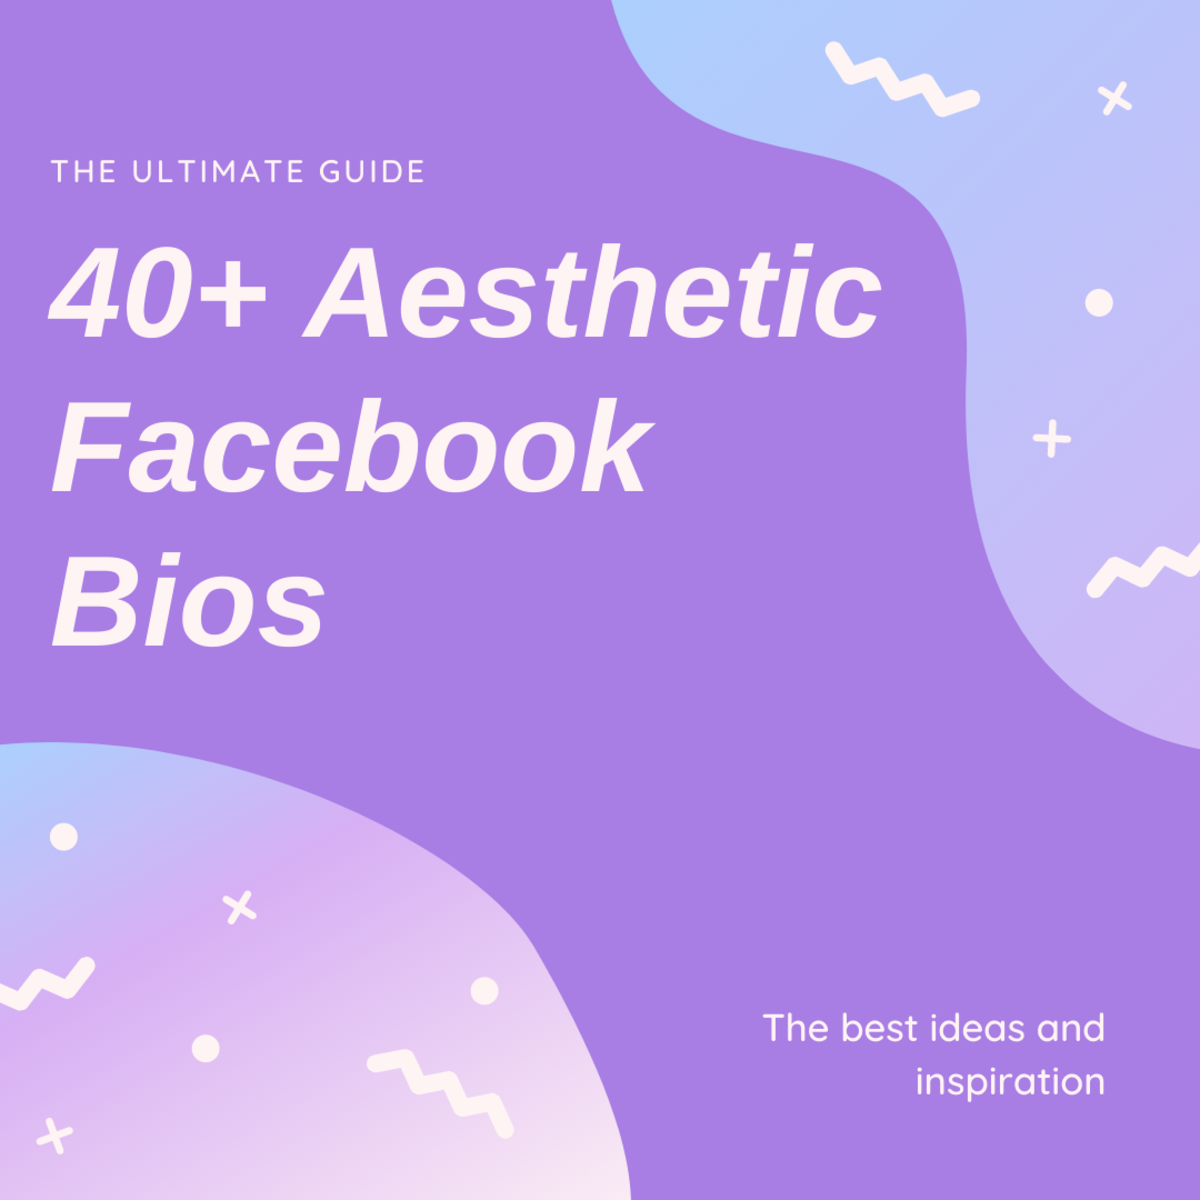 40+ Aesthetic Facebook Bios and Ideas: The Ultimate List